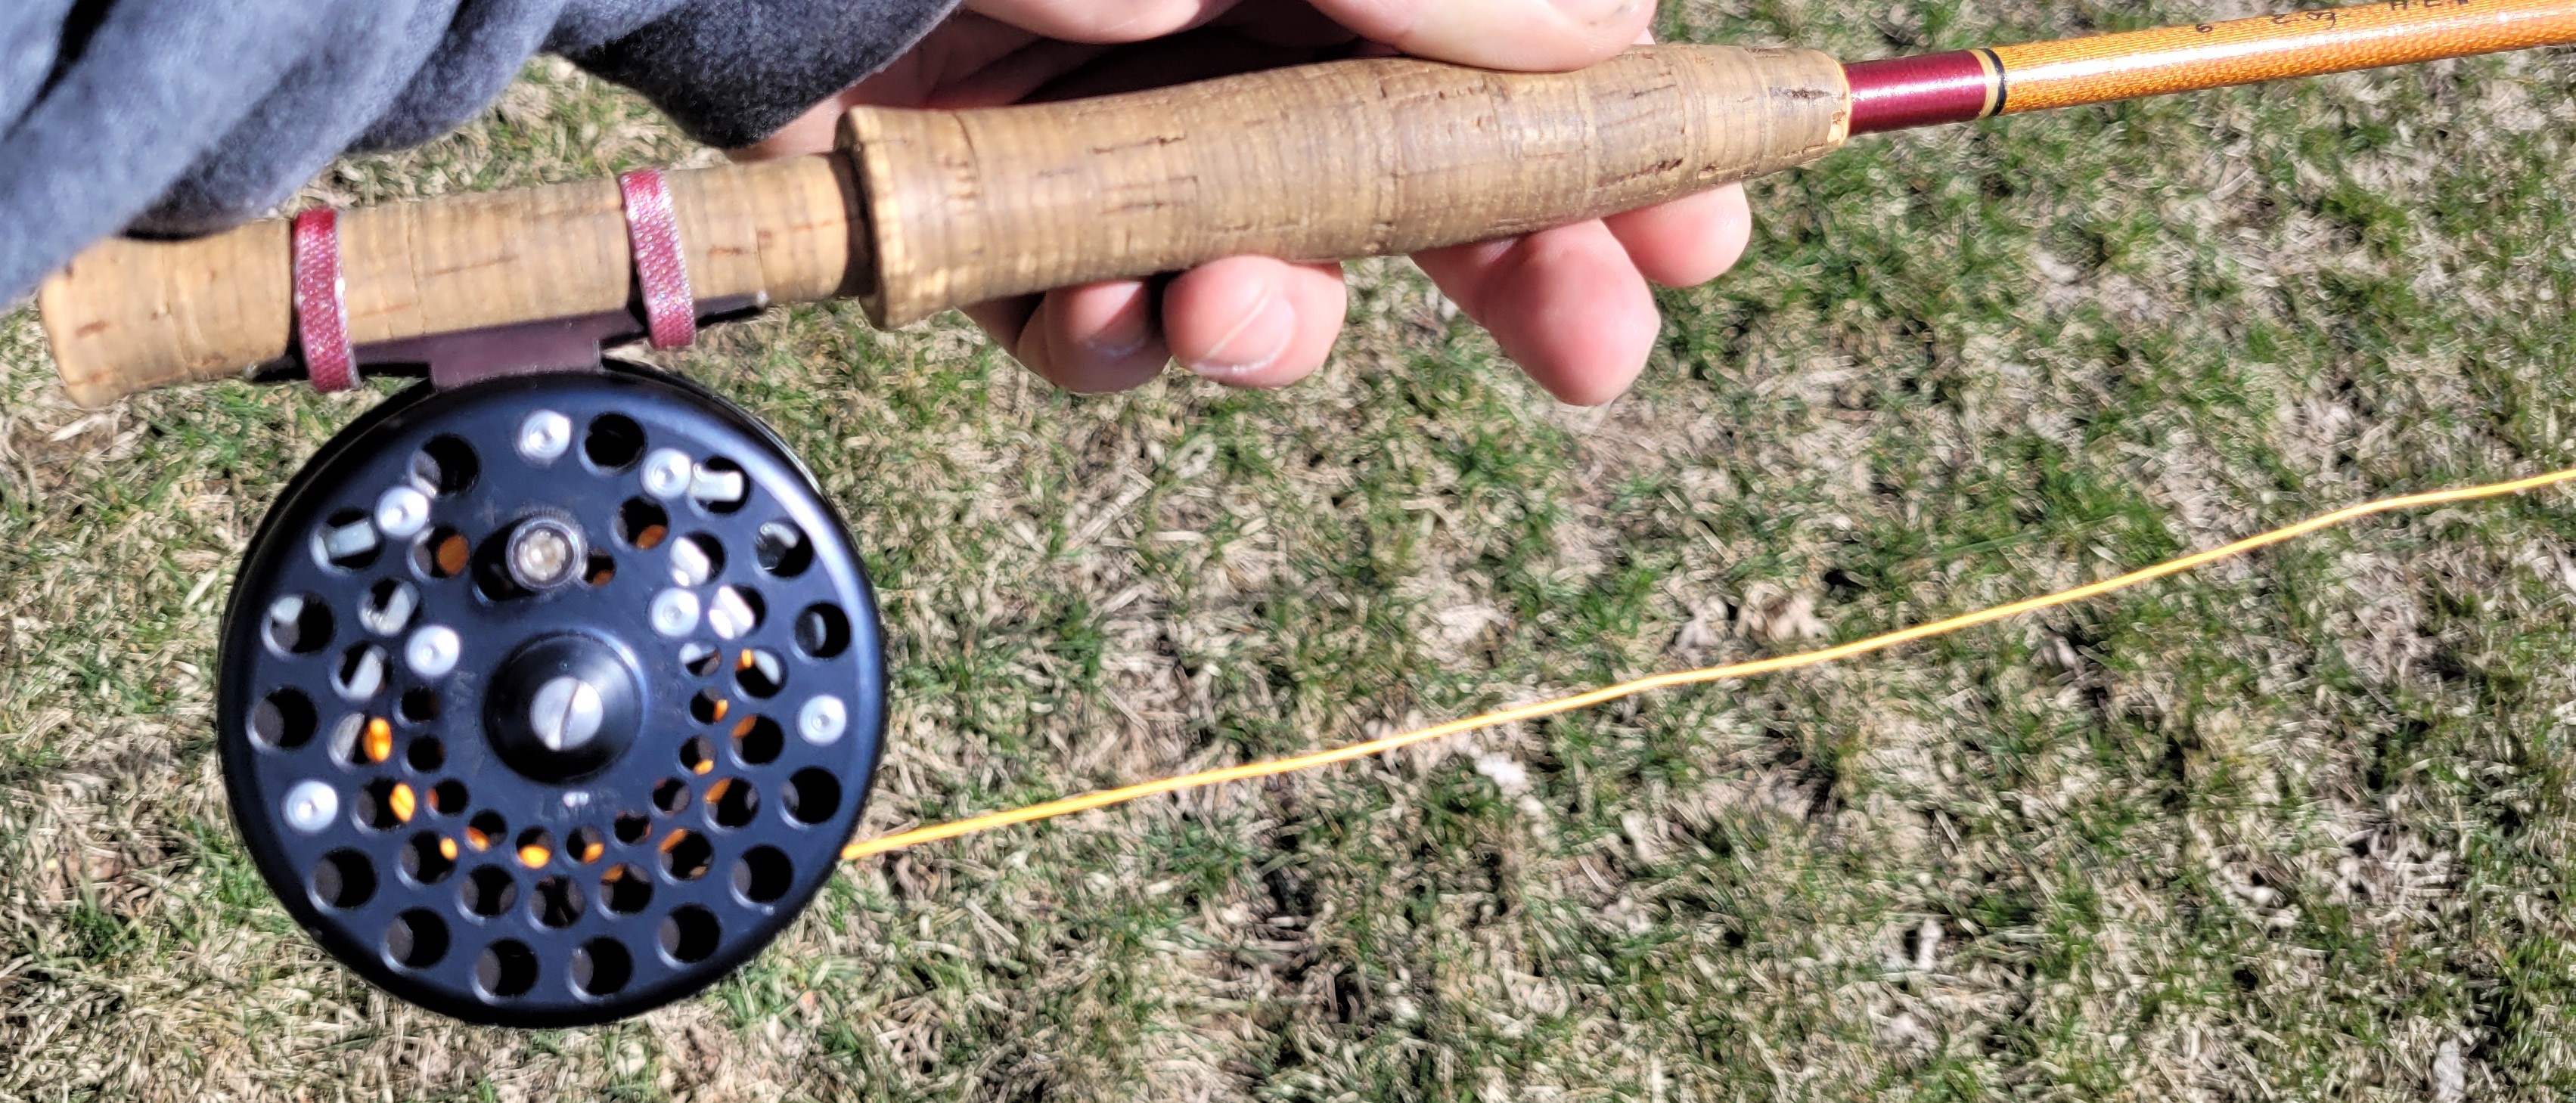 Identifying Old Silaflex Rod  Collecting Fiberglass Fly Rods